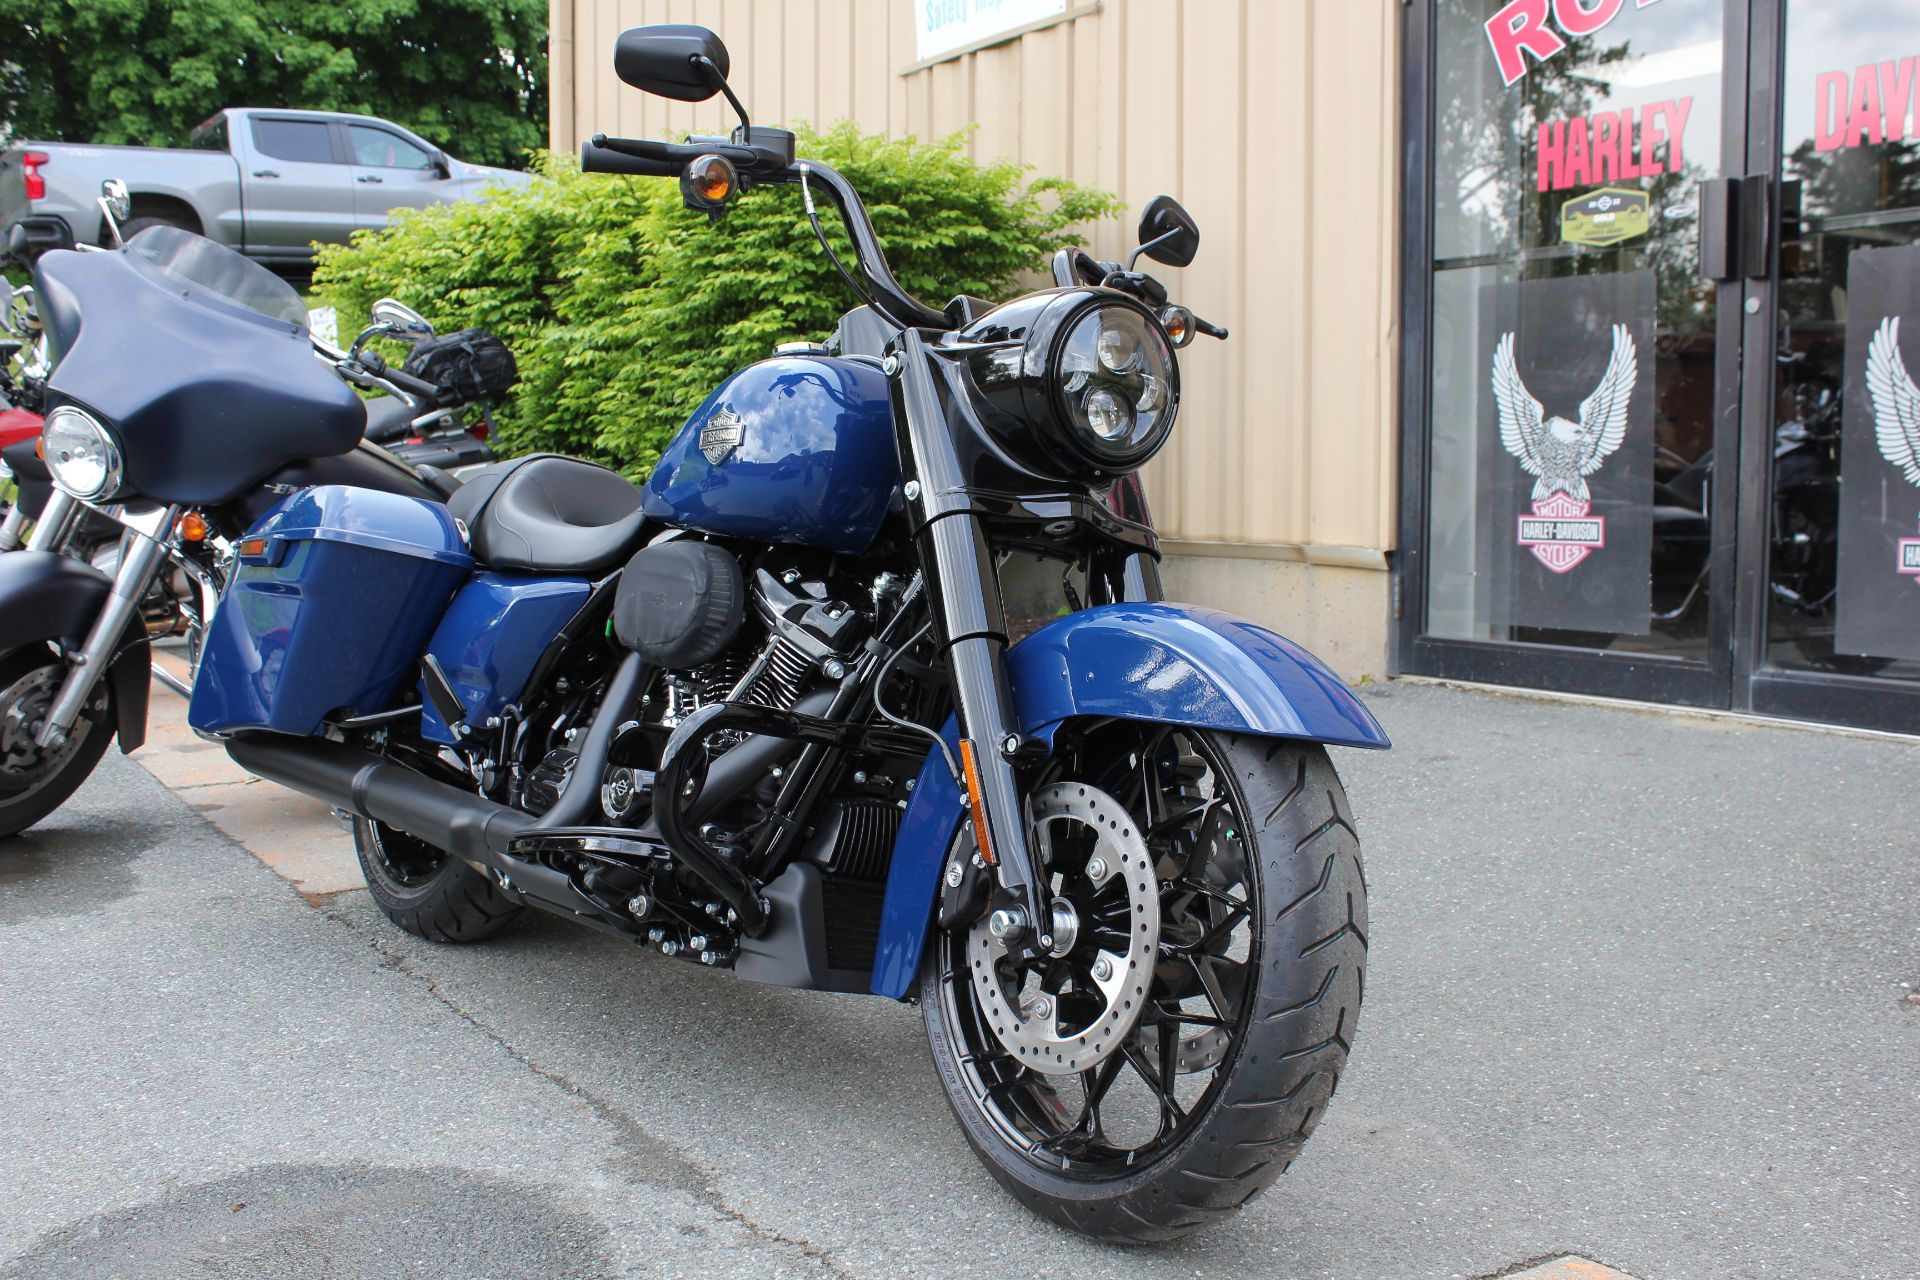 2023 Harley-Davidson Road King® Special in Pittsfield, Massachusetts - Photo 4